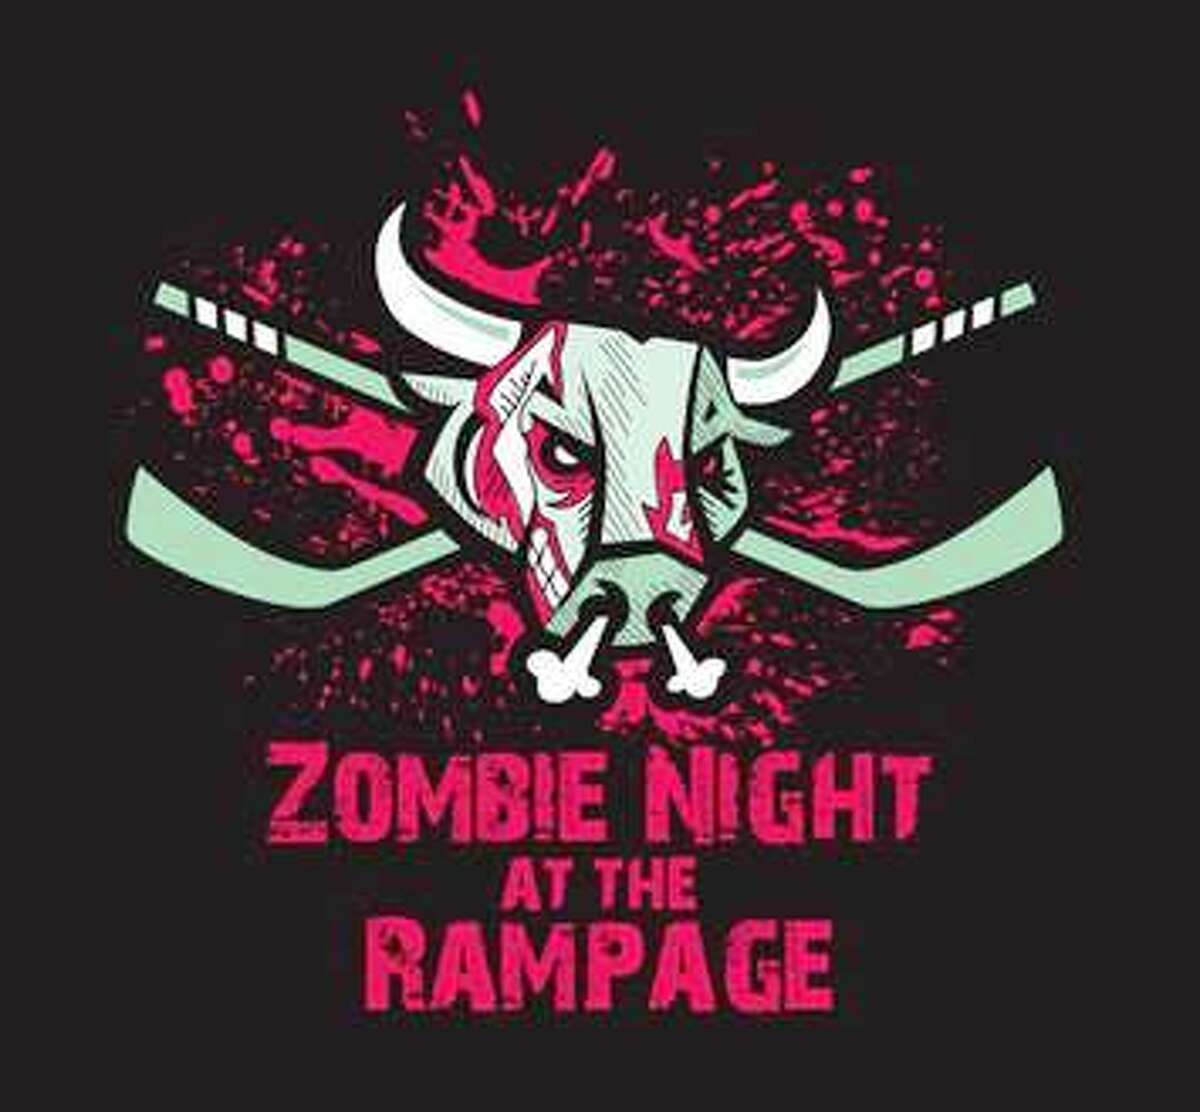 The San Antonio Rampage hockey team has done lots of crazy promotions, but none like this. Friday’s American Hockey League game with the Rockford IceHogs will also be the Rampage’s first Zombie Night. The first 2,500 fans will receive a zombie koozie; there will be a costume contest for grownups and kids. More Halloween activities are planned, and a team spokesman indicated in a news release that real zombies will be admitted free — but will be confined to the penalty box. Whew! That’s a relief. Also, it’s $1 drink night.   7:30 p.m. Friday, AT&T Center, 1 AT&T Center Parkway. $6-$50 Ticketmaster.com. The Rampage and IceHogs will play again at 7 p.m. Saturday. -- Robert Johnson